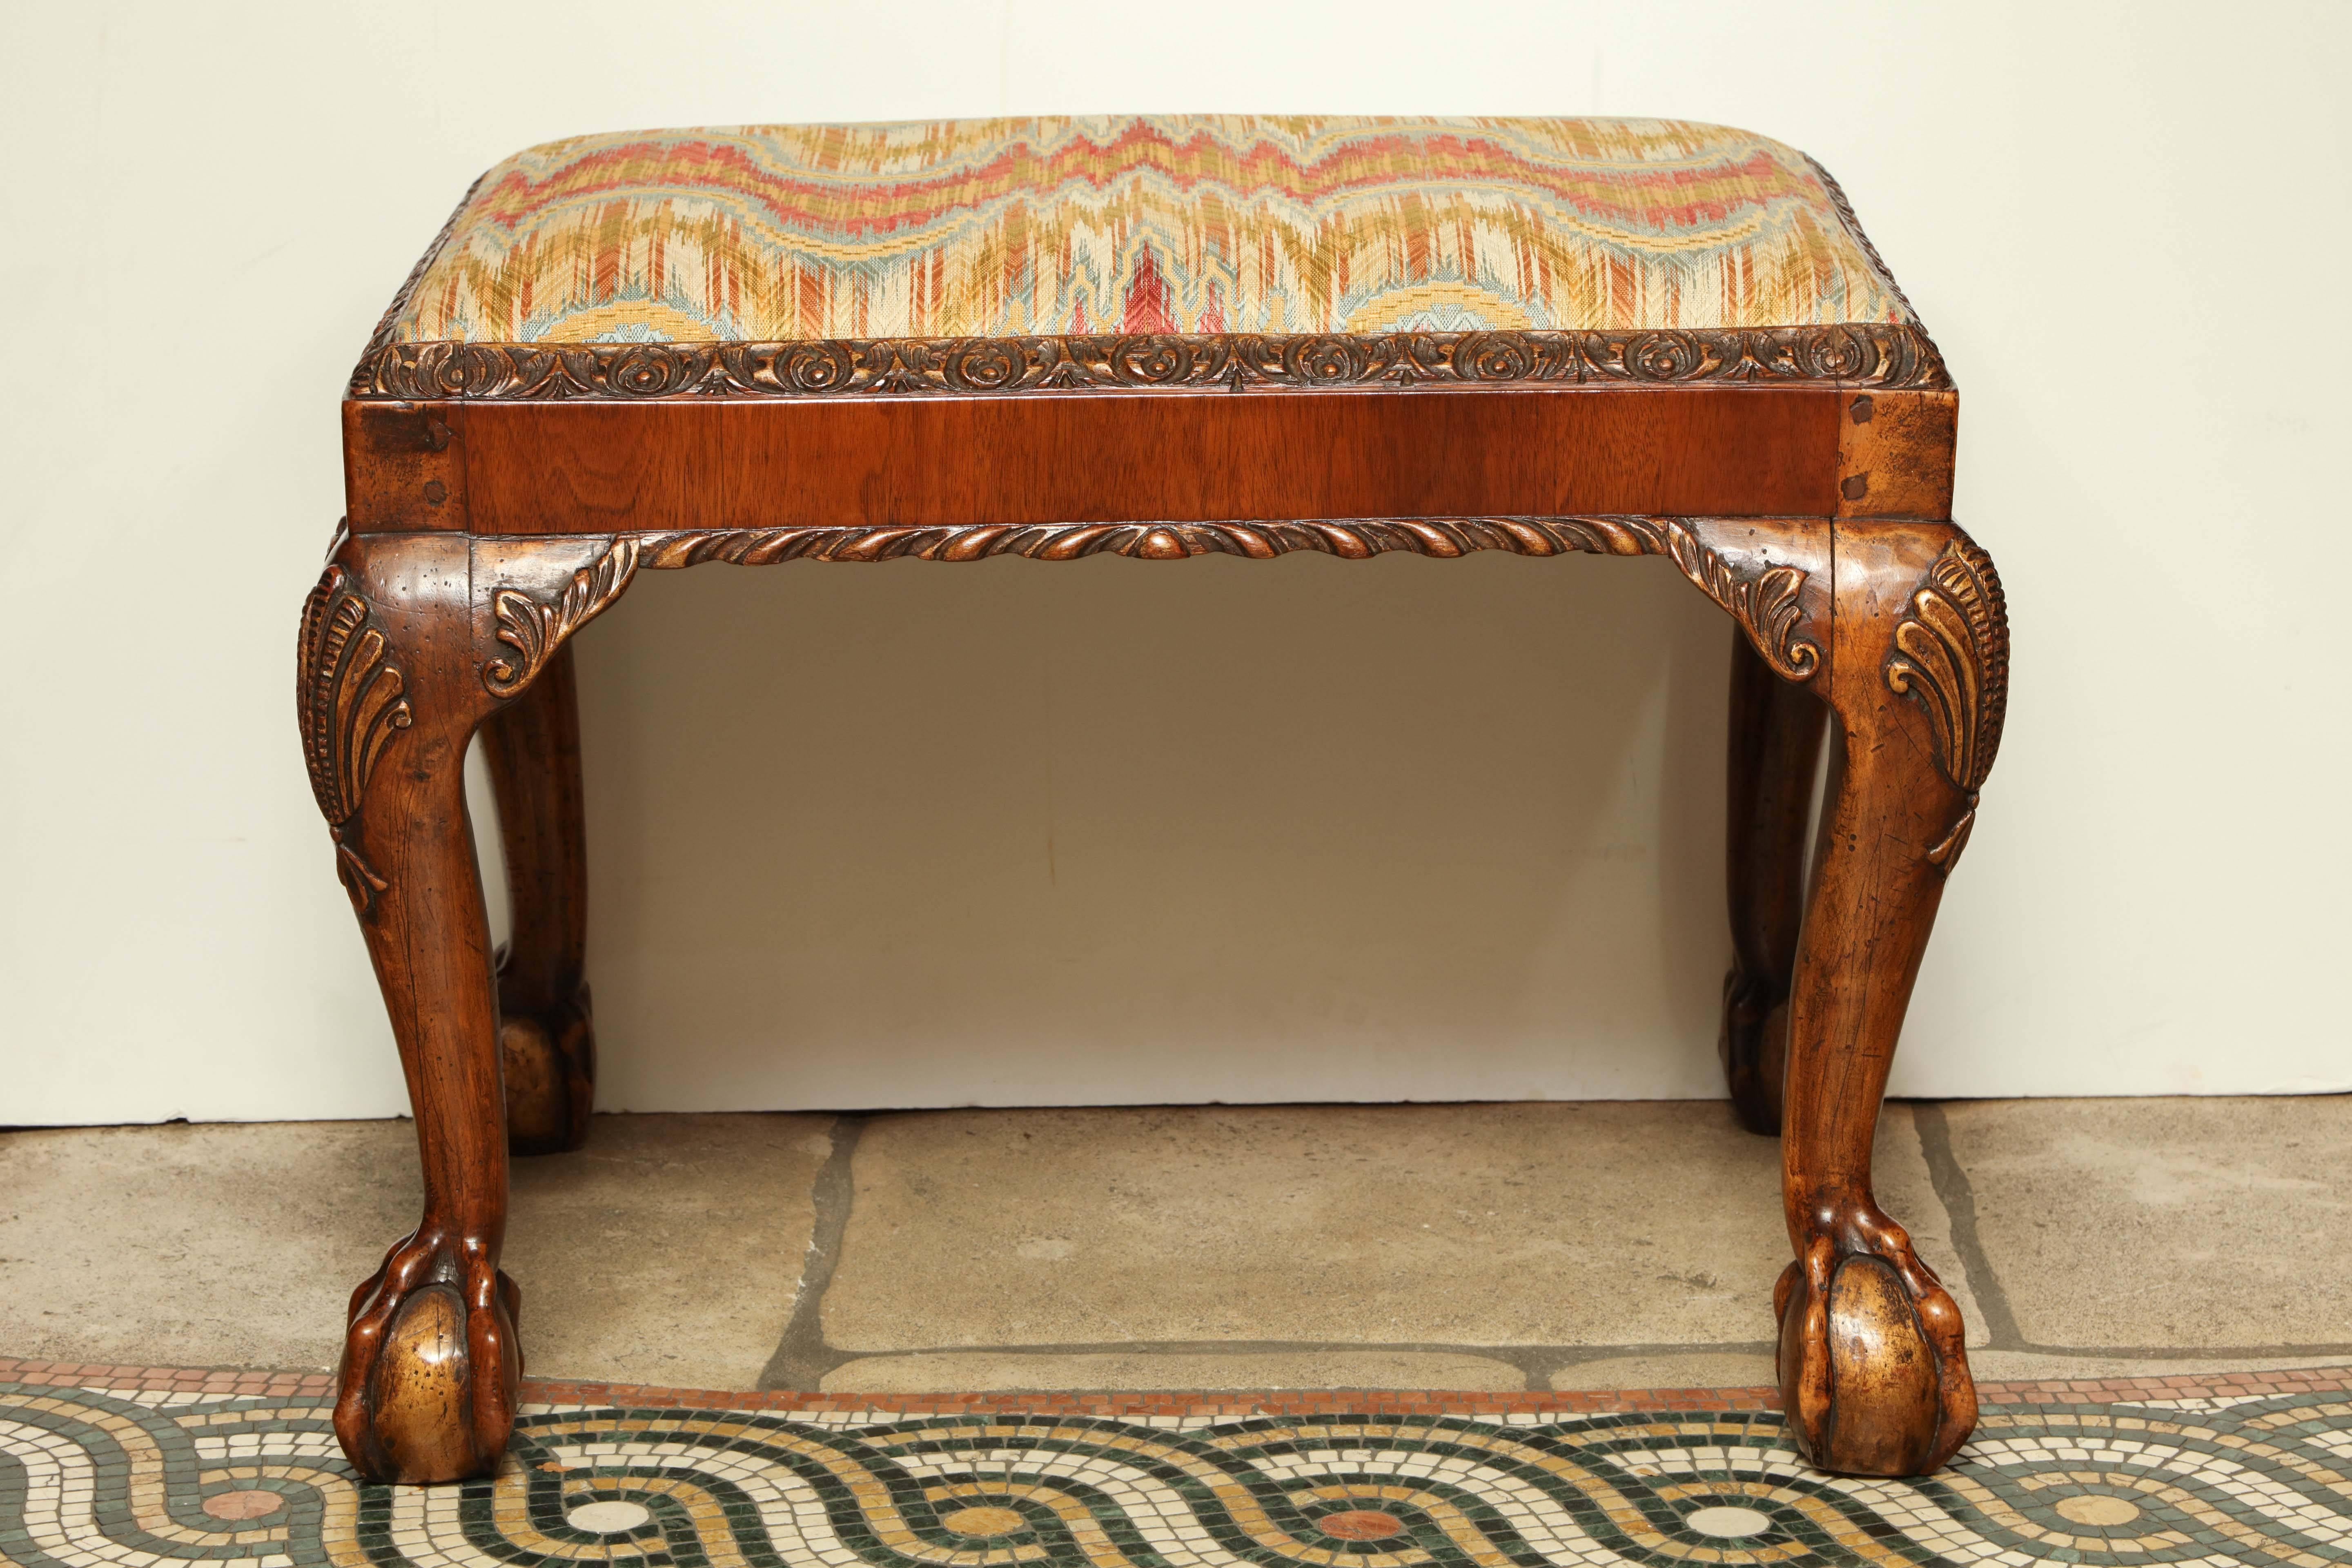 A fine pair of George II carved mahogany ball and claw foot stool with carved gadrooned edges and shell carved knees.